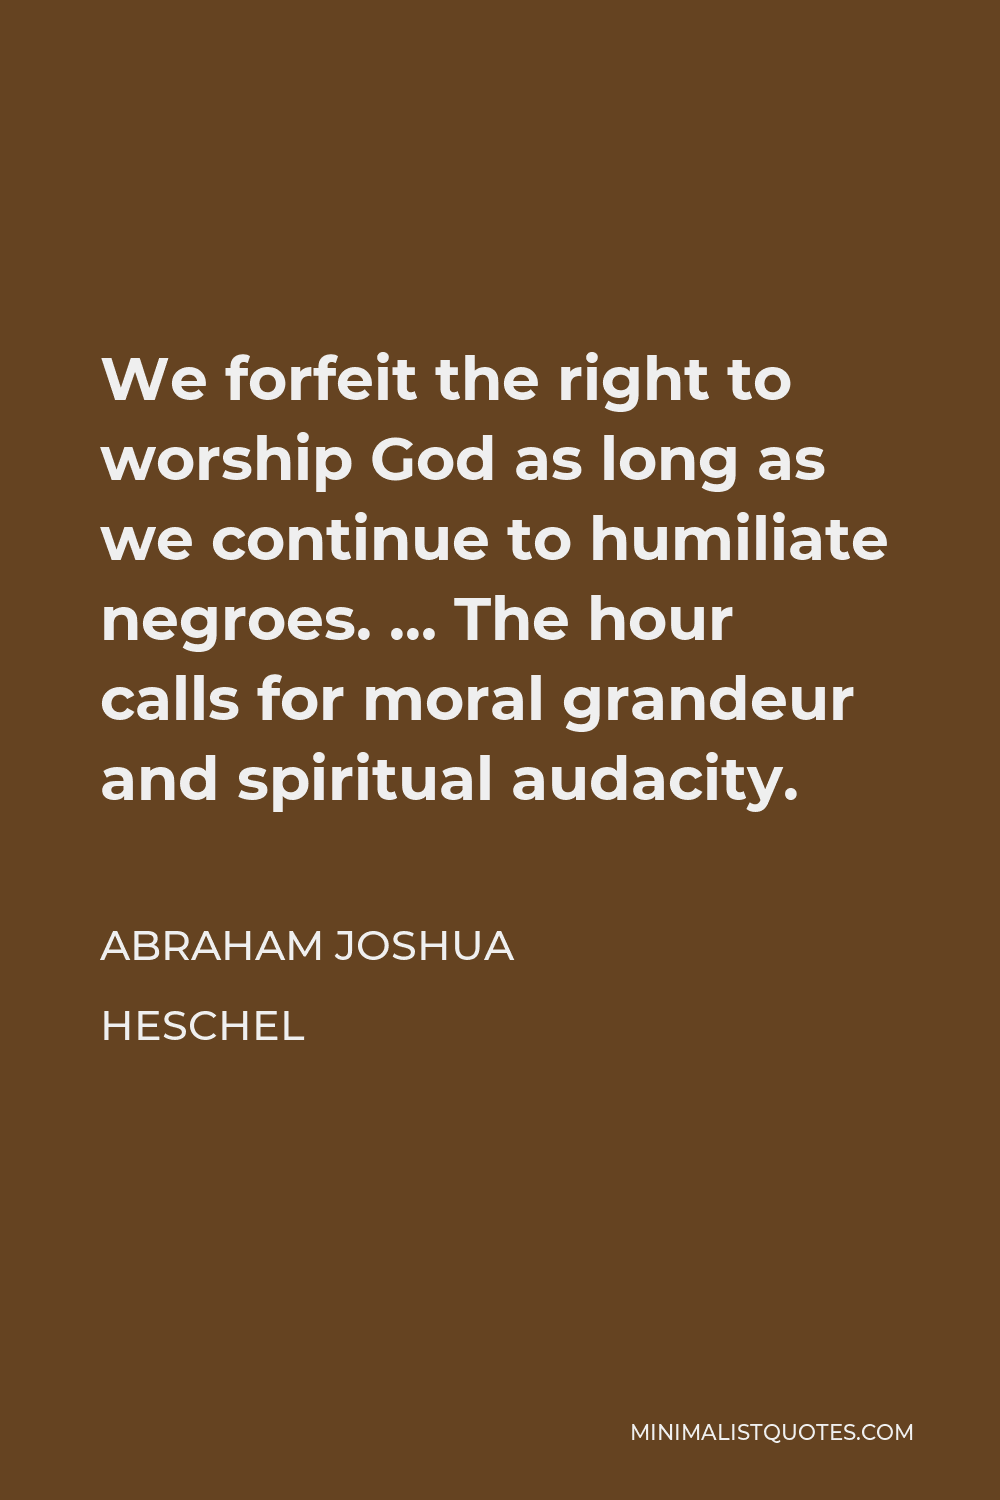 Abraham Joshua Heschel Quote - We forfeit the right to worship God as long as we continue to humiliate negroes. … The hour calls for moral grandeur and spiritual audacity.